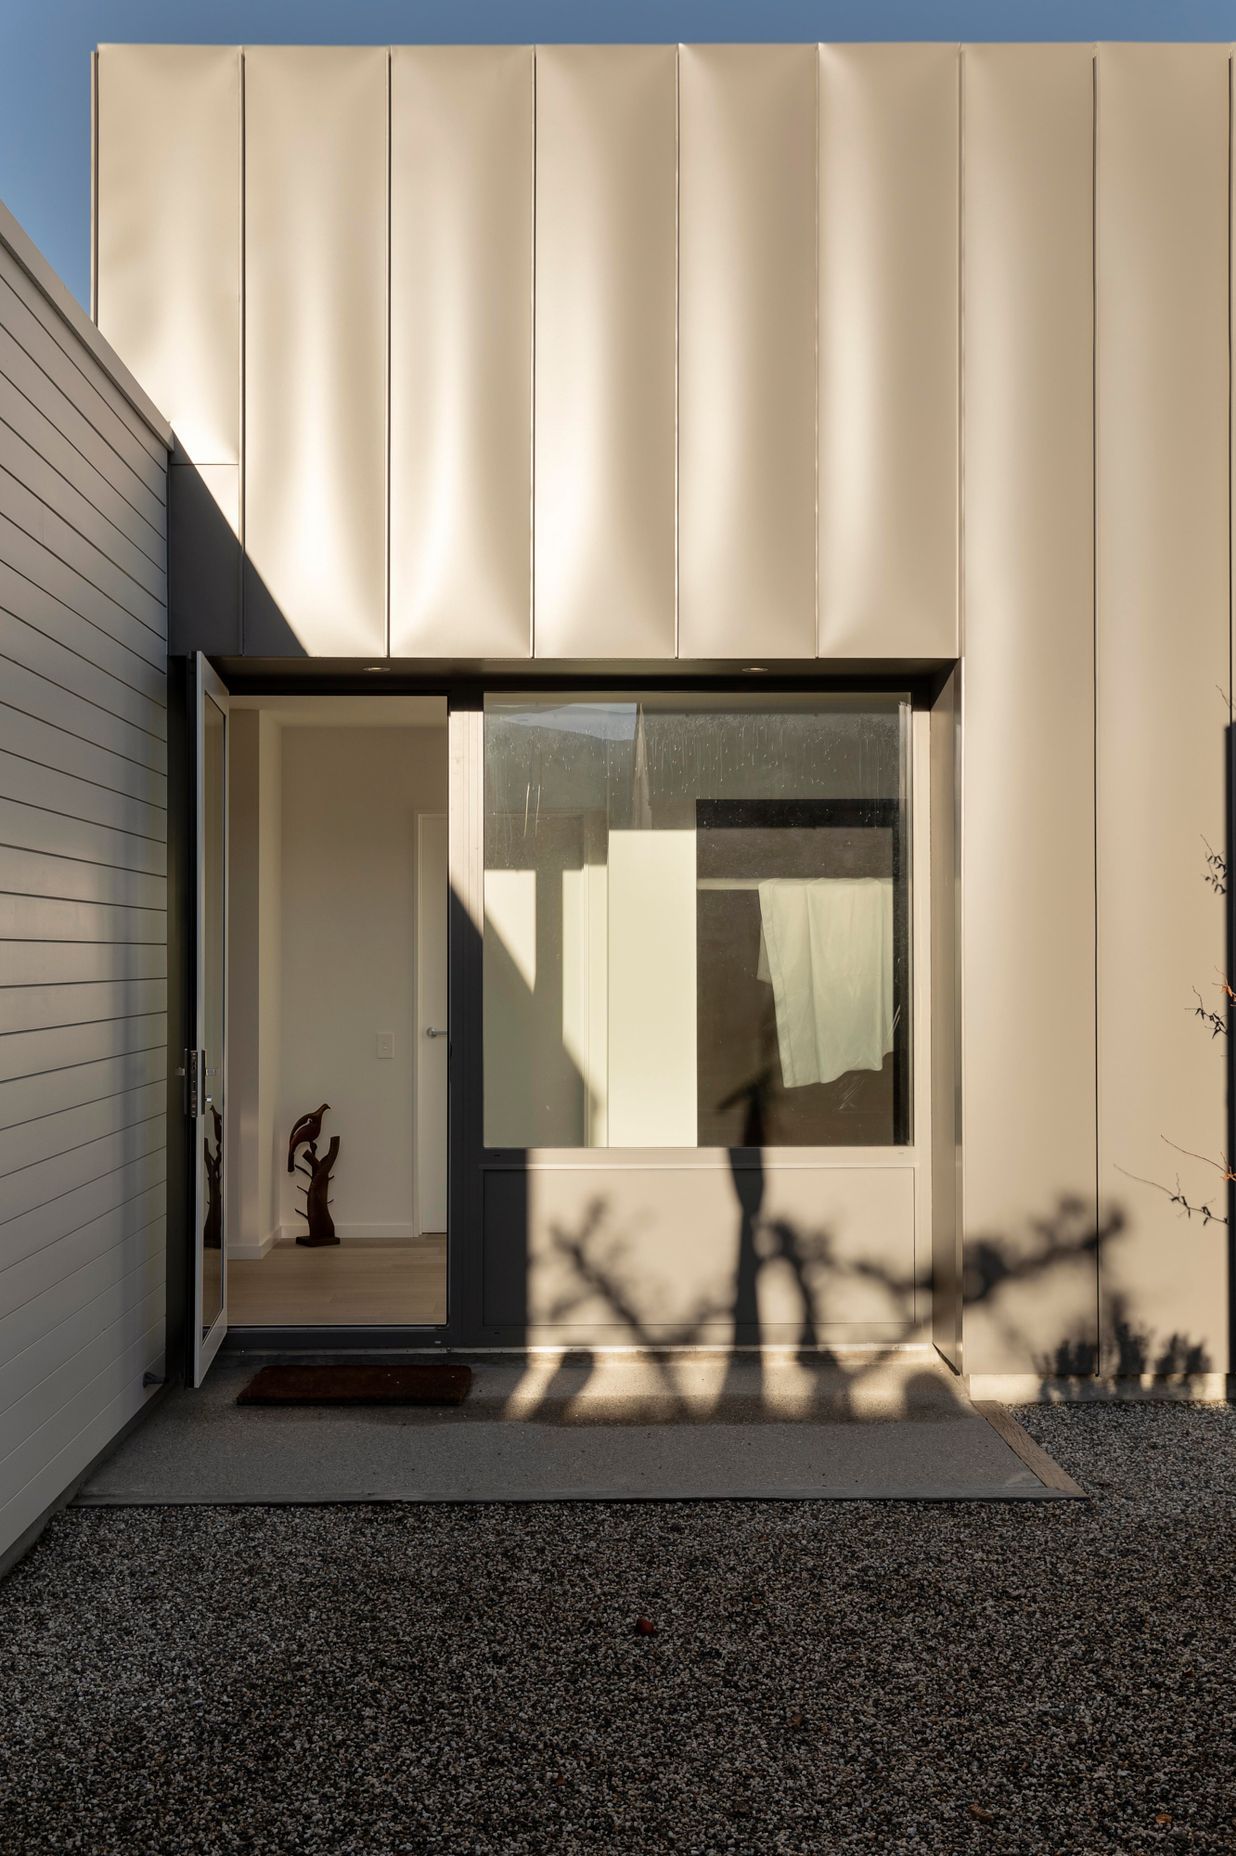 The intersection between the white and grey parts of the house is seamless and throws interesting shadows across the building.